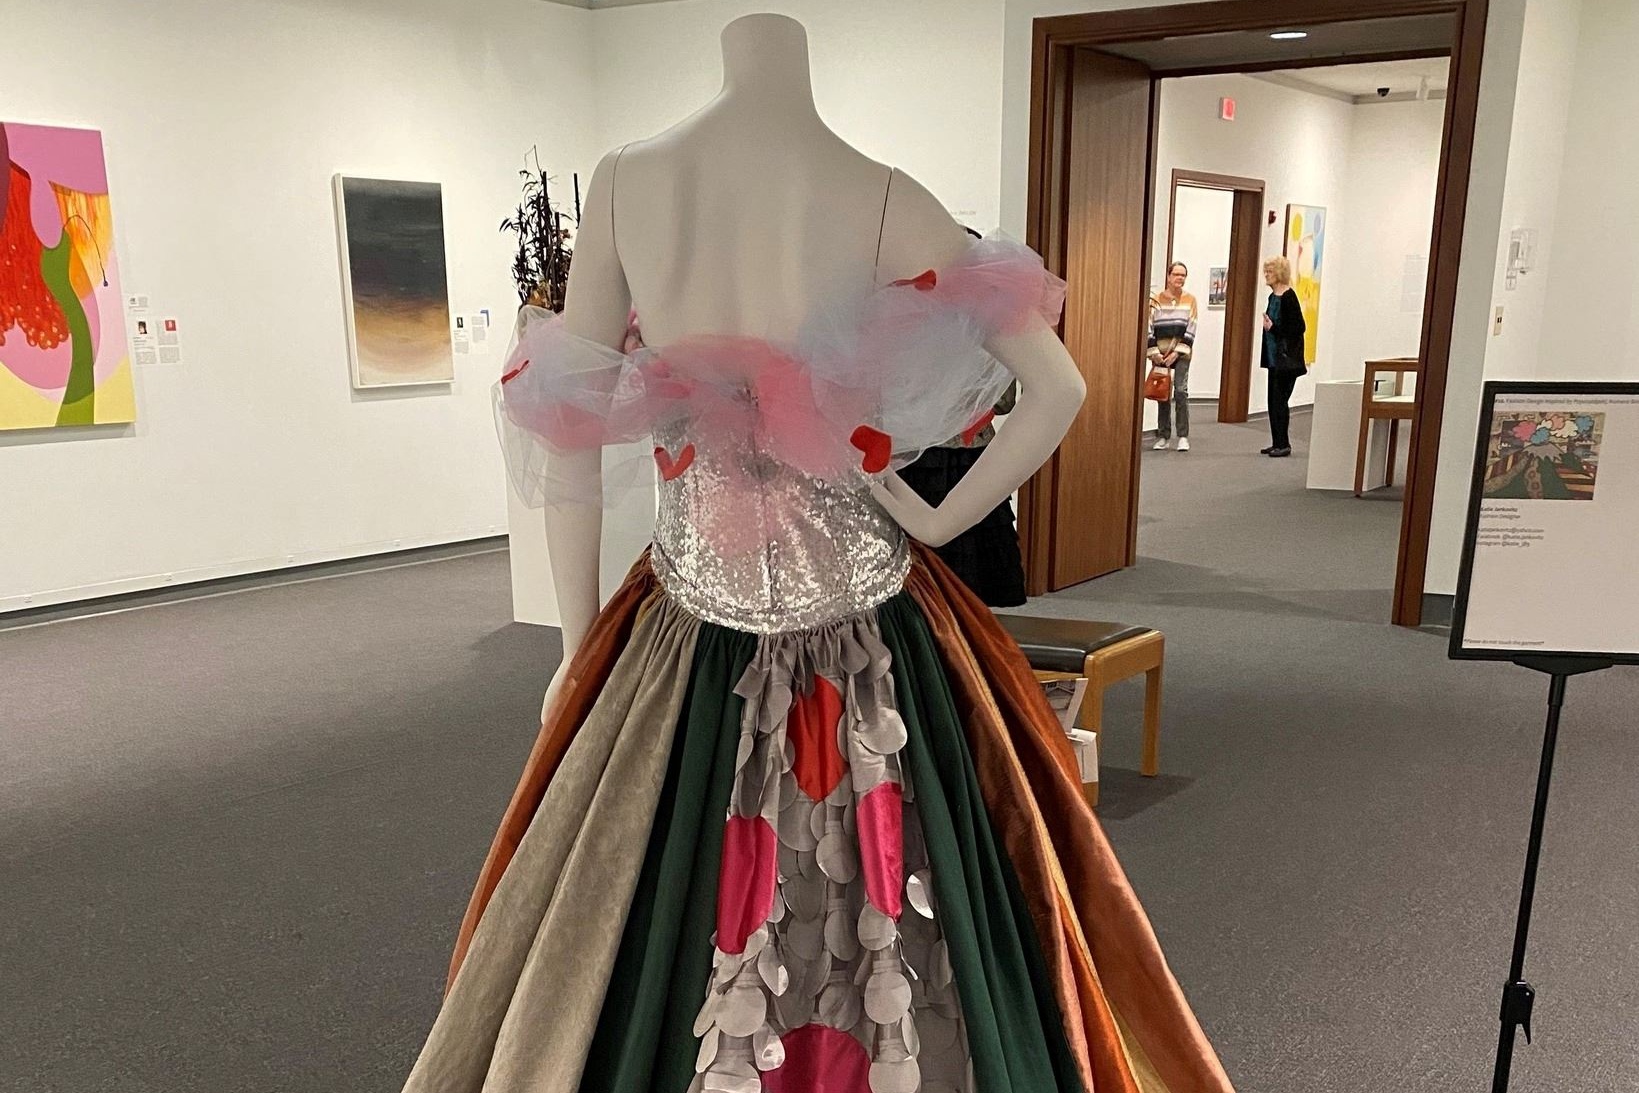 A dress is displayed on a mannequin inside an art museum